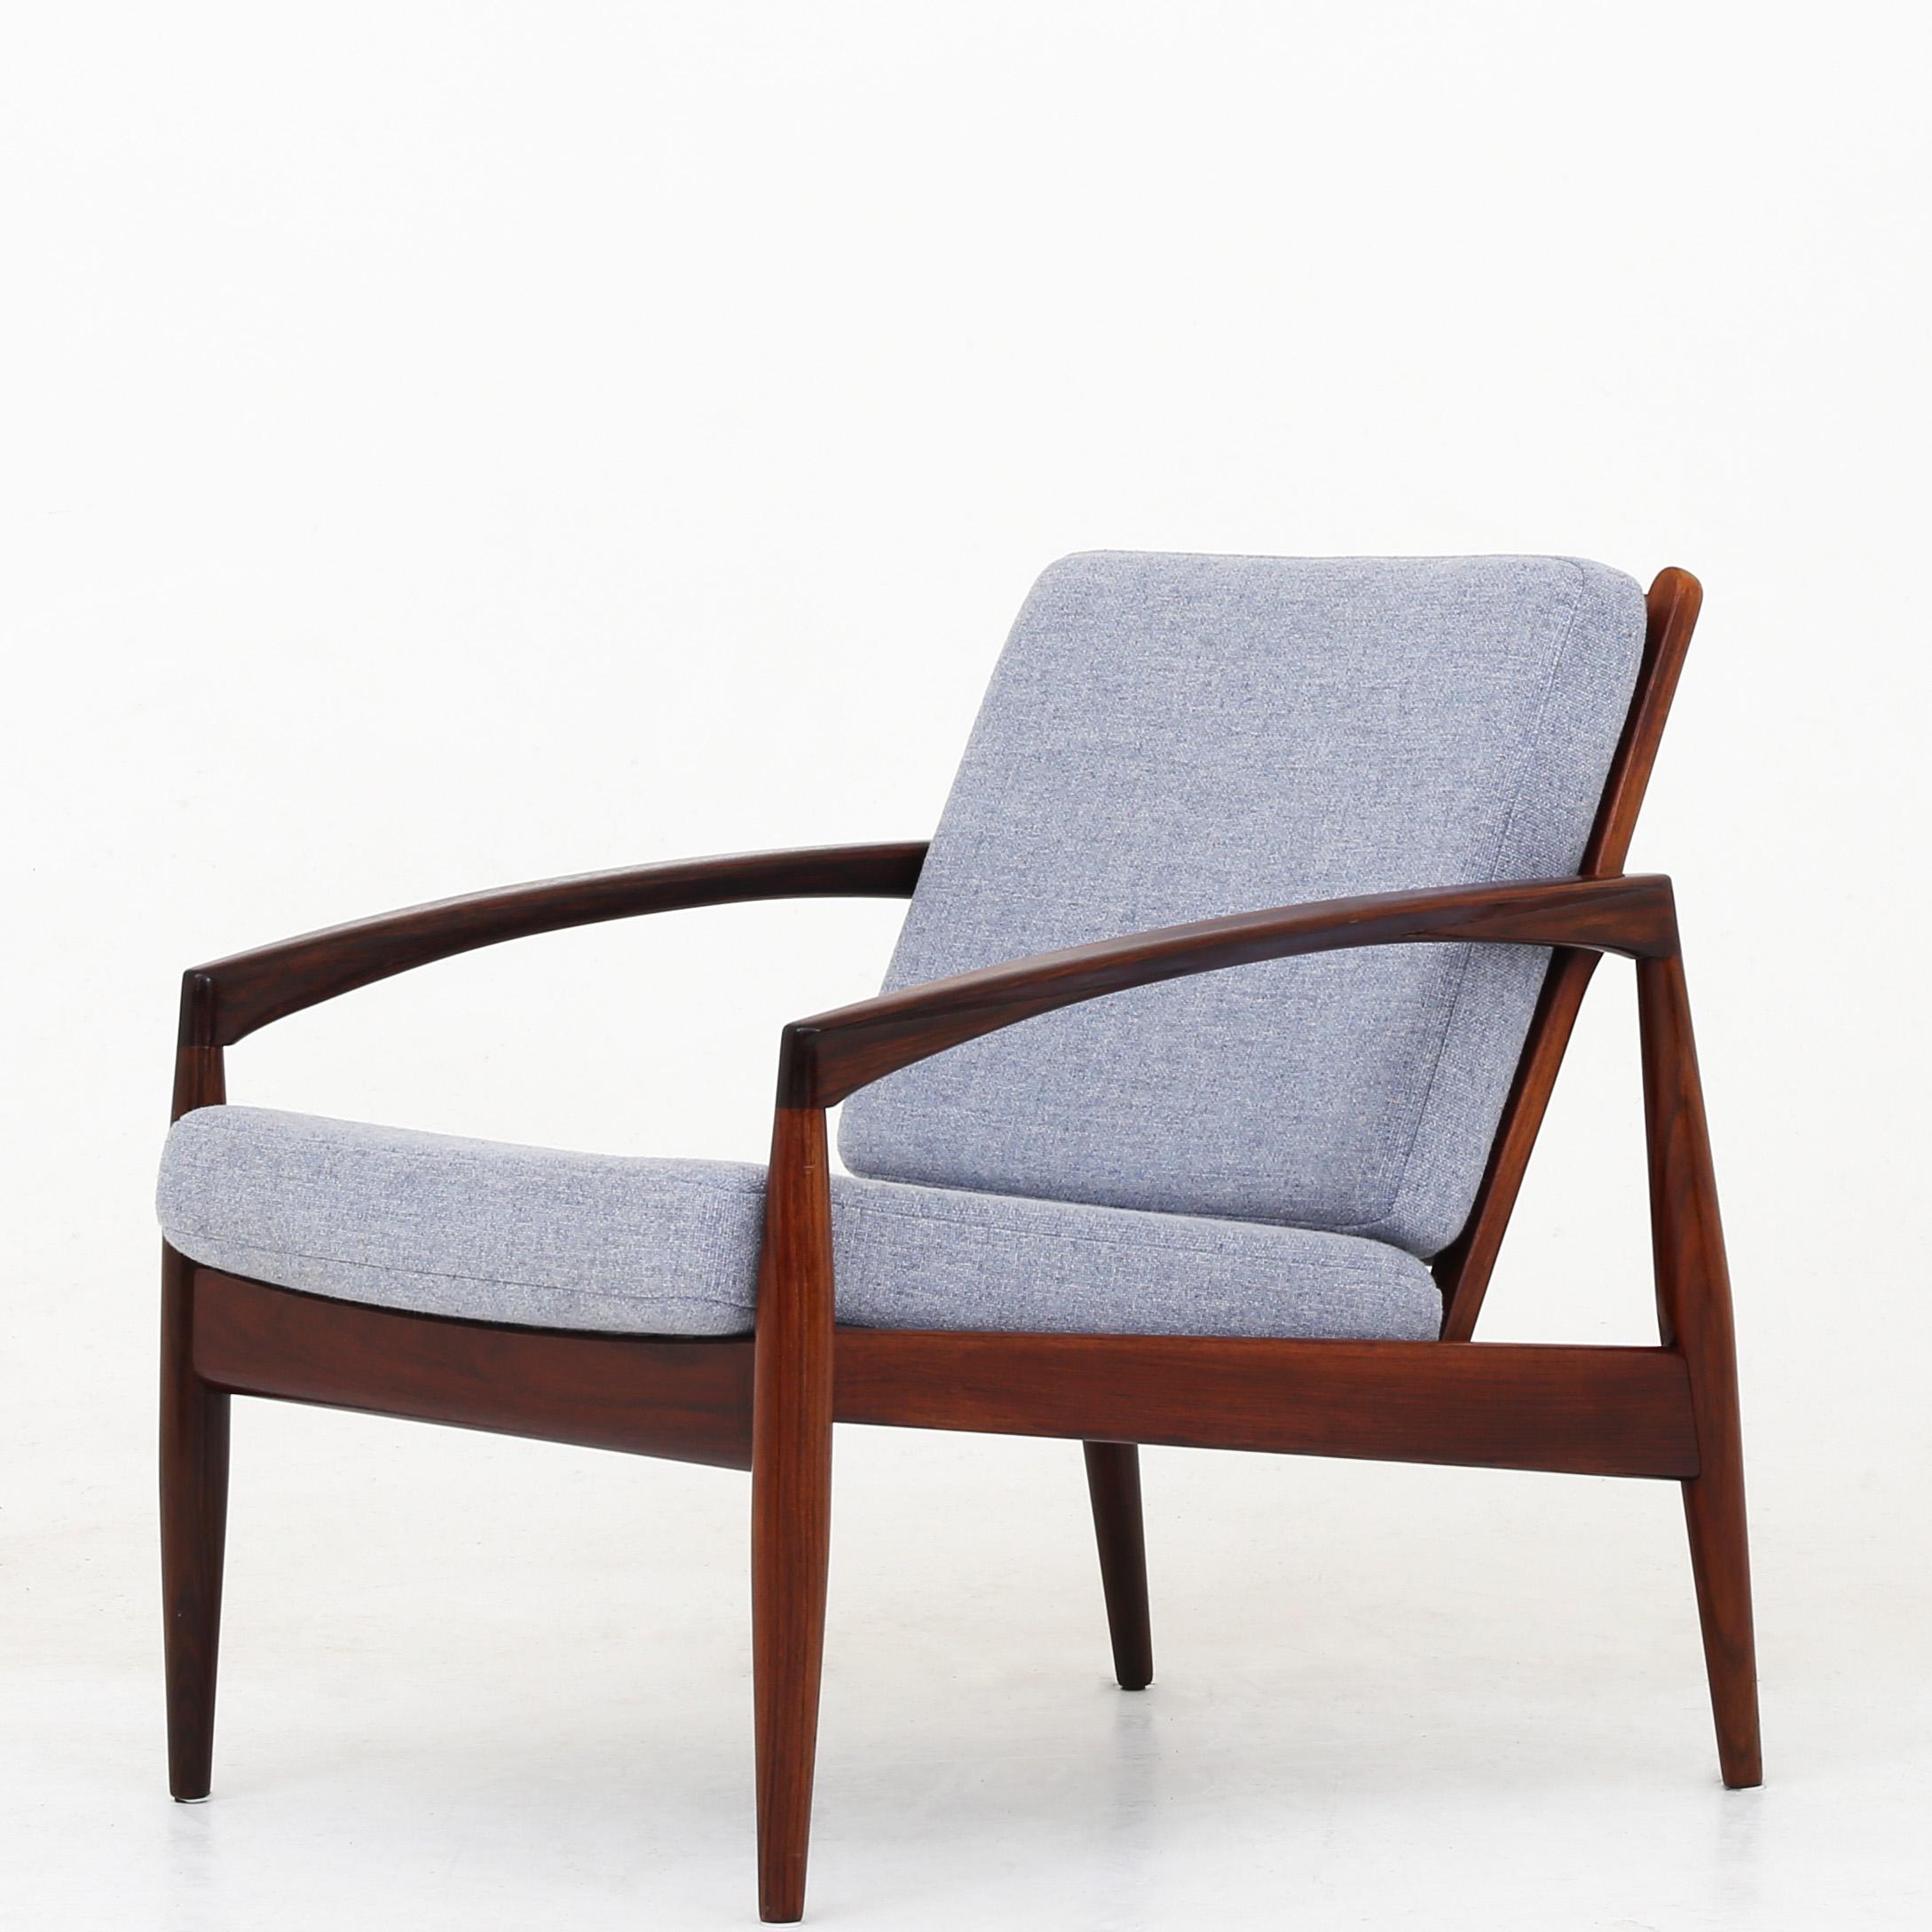 Kai Kristiansen Model 121 - Pair of 'Paper Knife' easy chairs in rosewood with grey wool. Maker Magnus Olesen.